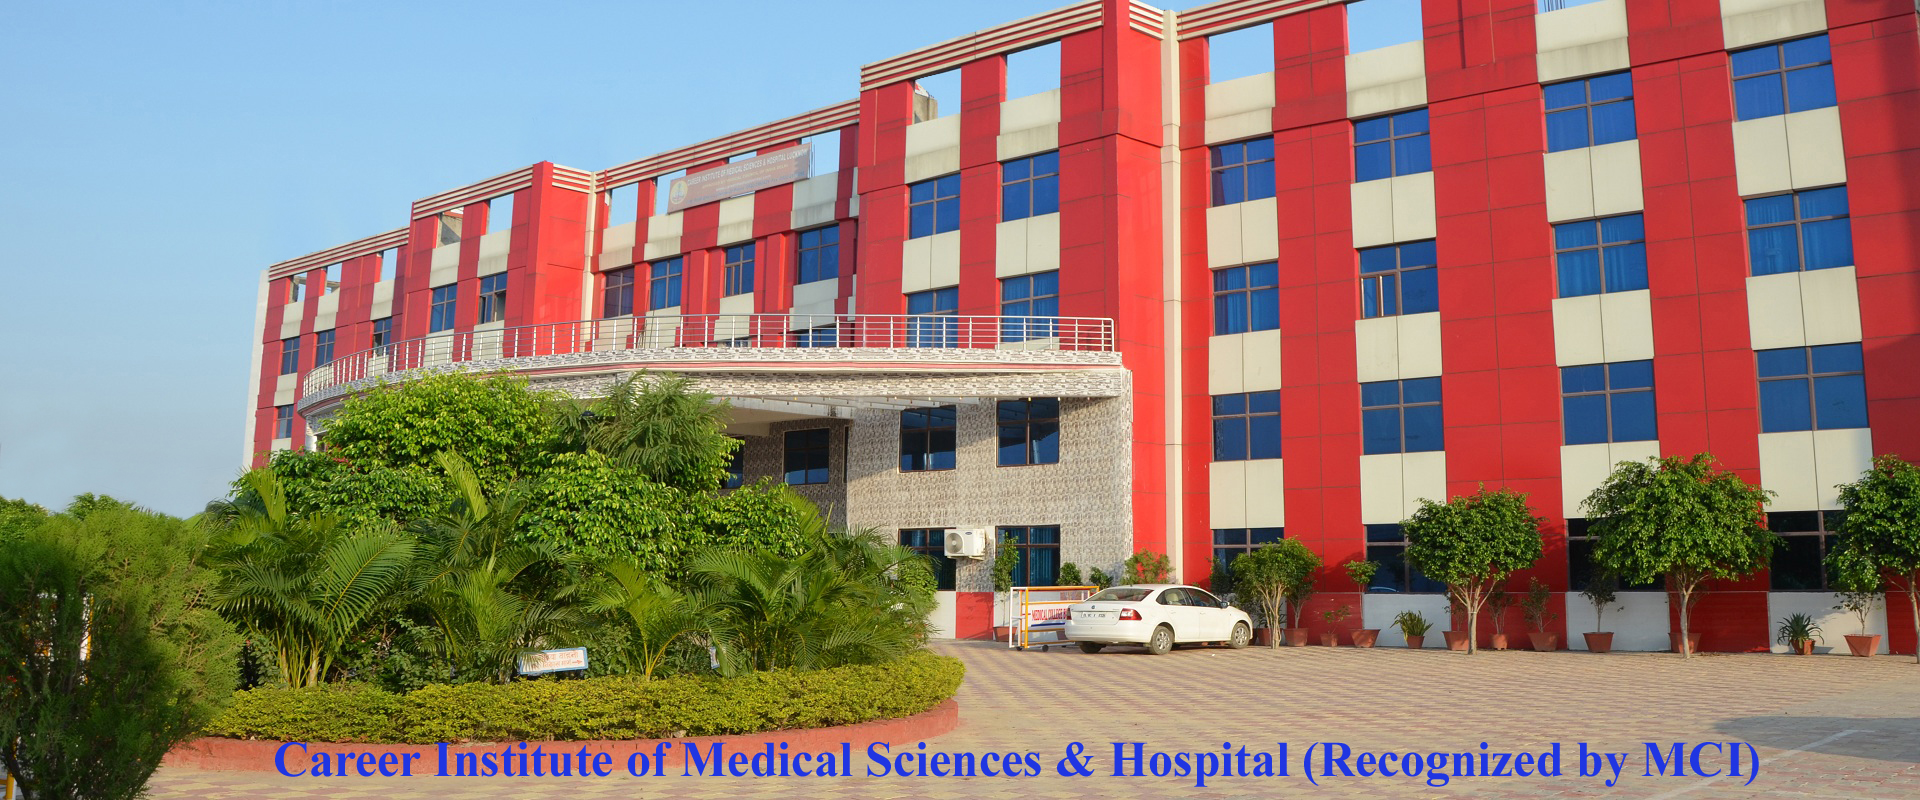 Career Institute of Medical Sciences and Hospital Lucknow 2022-23: Admission , Courses Offered, Fee Structure, Eligibility, Cutoff, Counselling, Contact Details